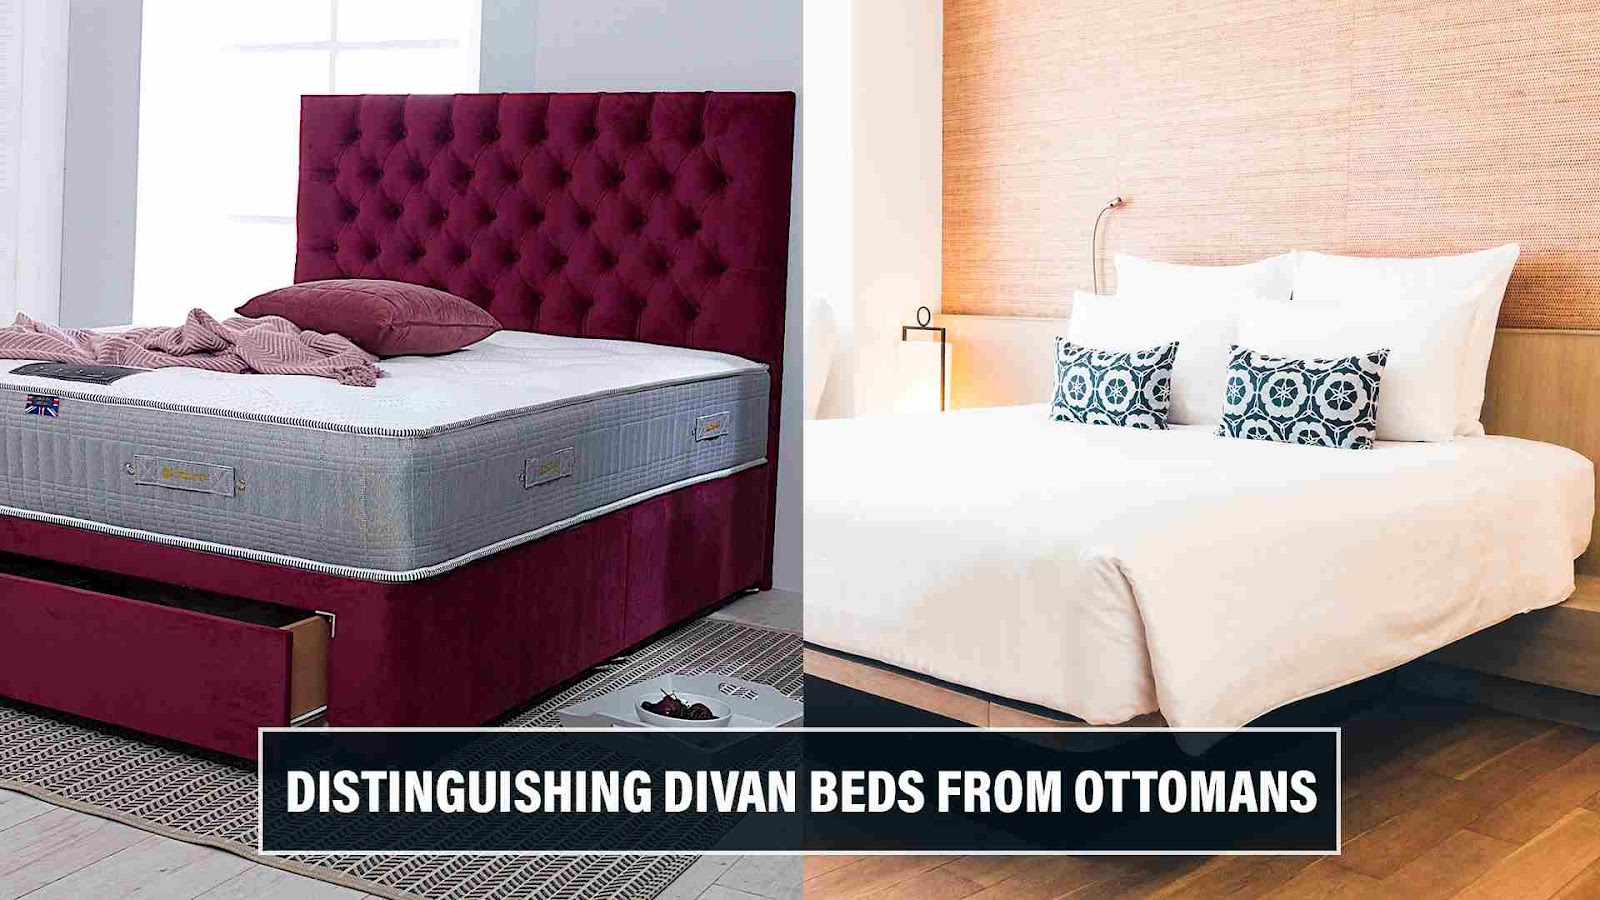 Distinguishing Divan Beds from Ottomans